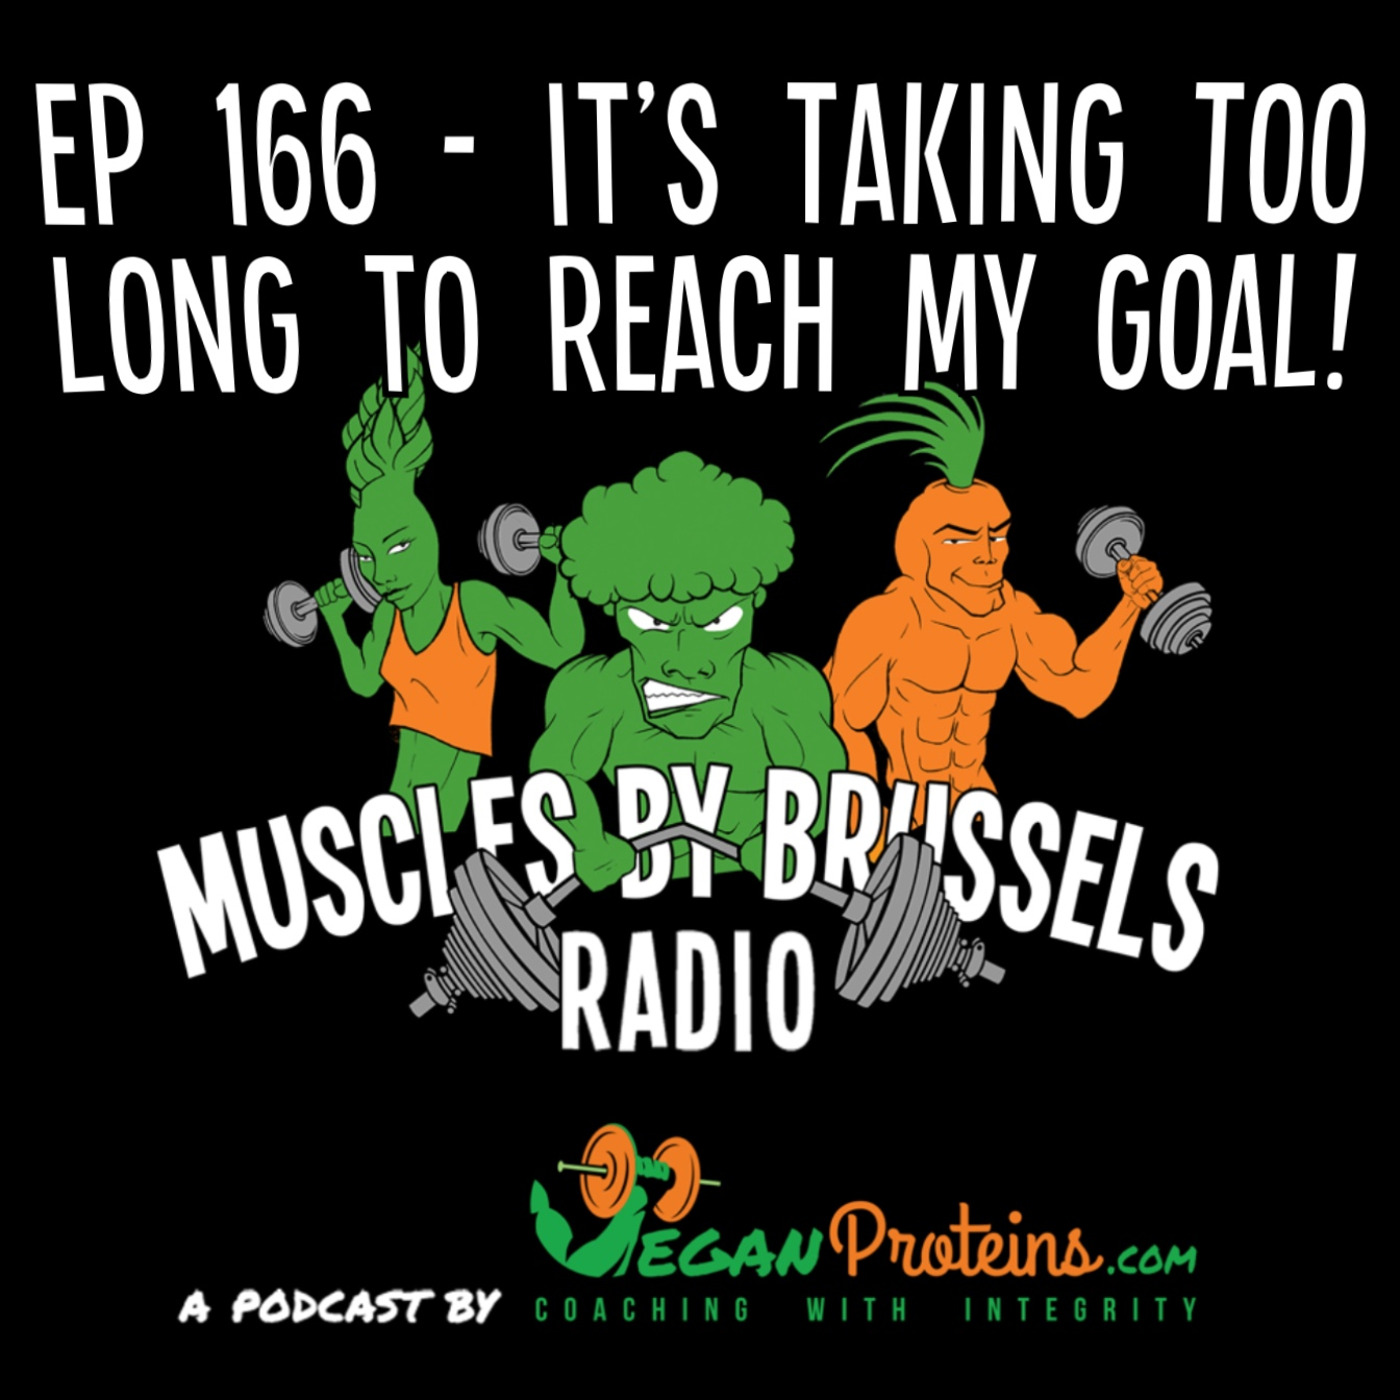 Ep 166 - It's Taking Too Long To Reach My Goal!